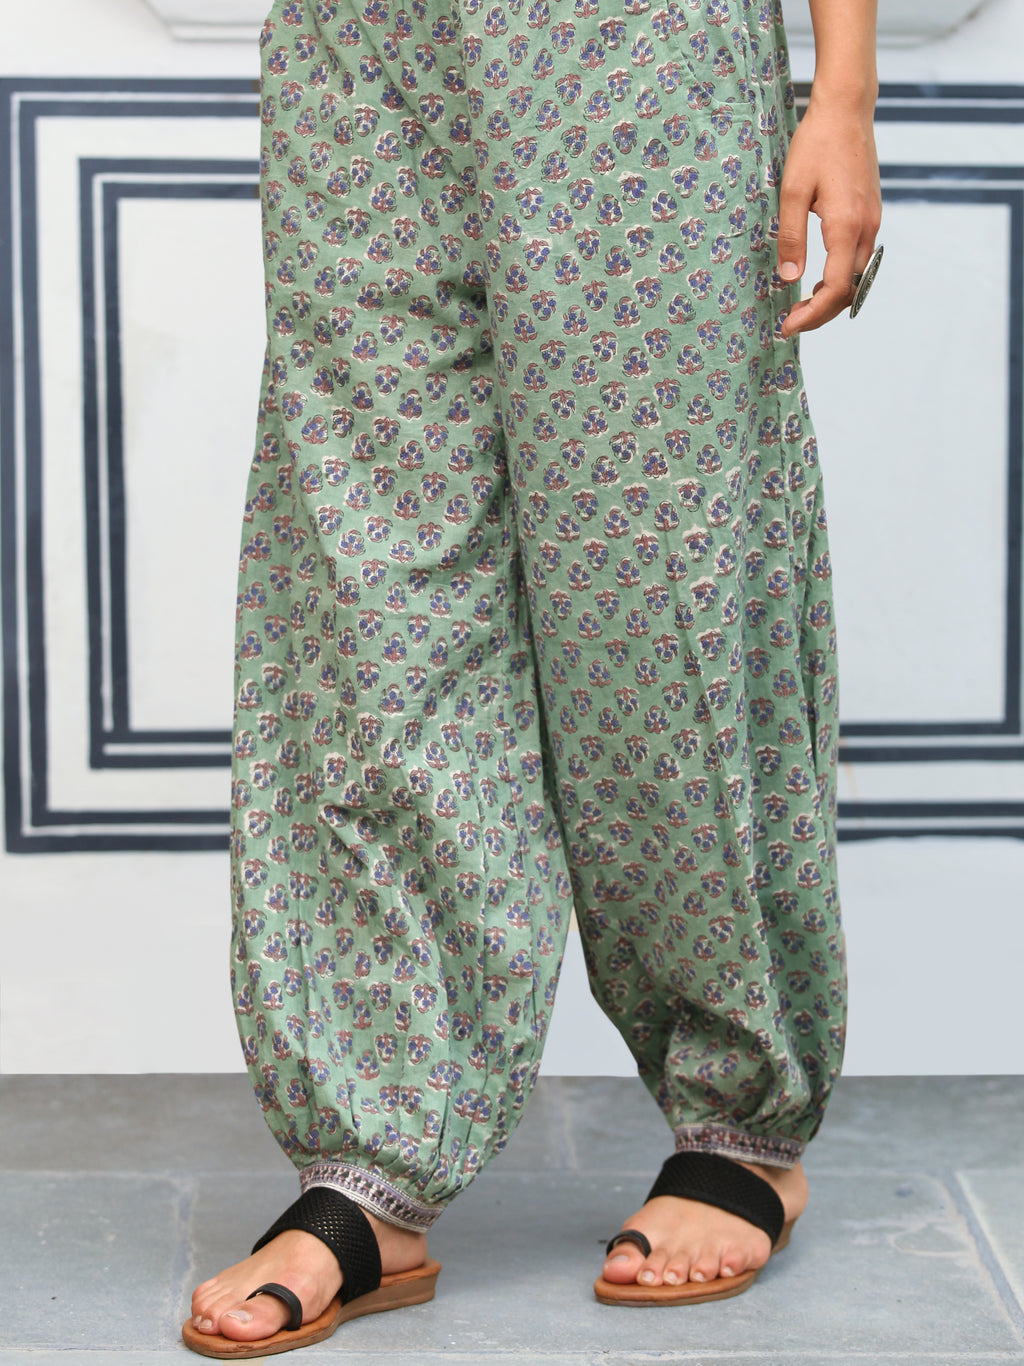 Buy Textured Churidar Pants Online at Best Prices in India - JioMart.